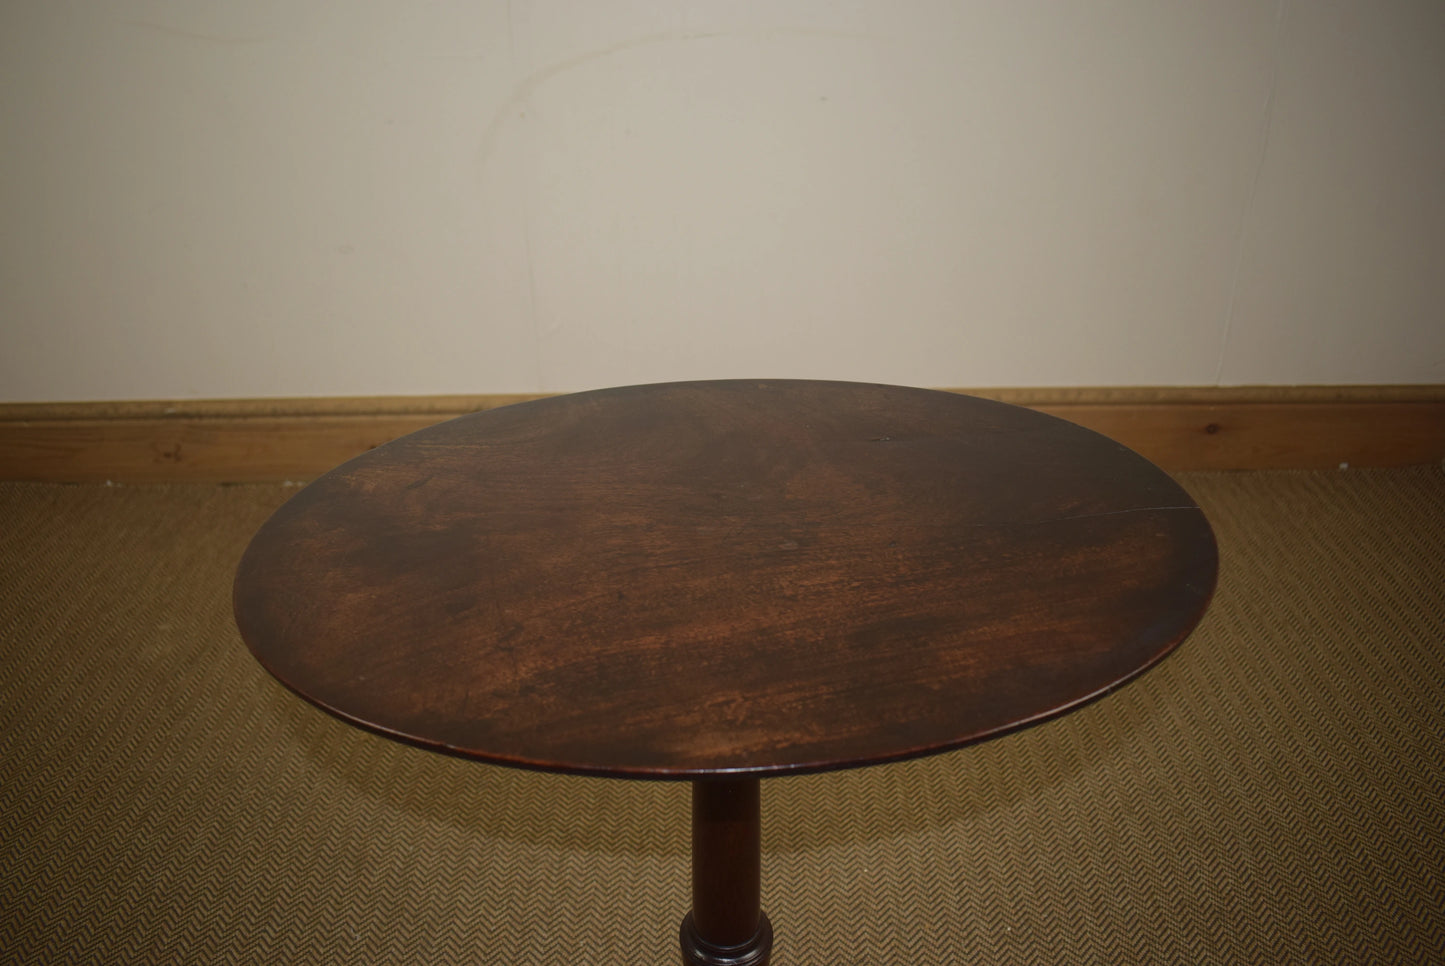 Elegant 19th Century Fruitwood and Oak Lamp Table - A Timeless Heirloom Piece